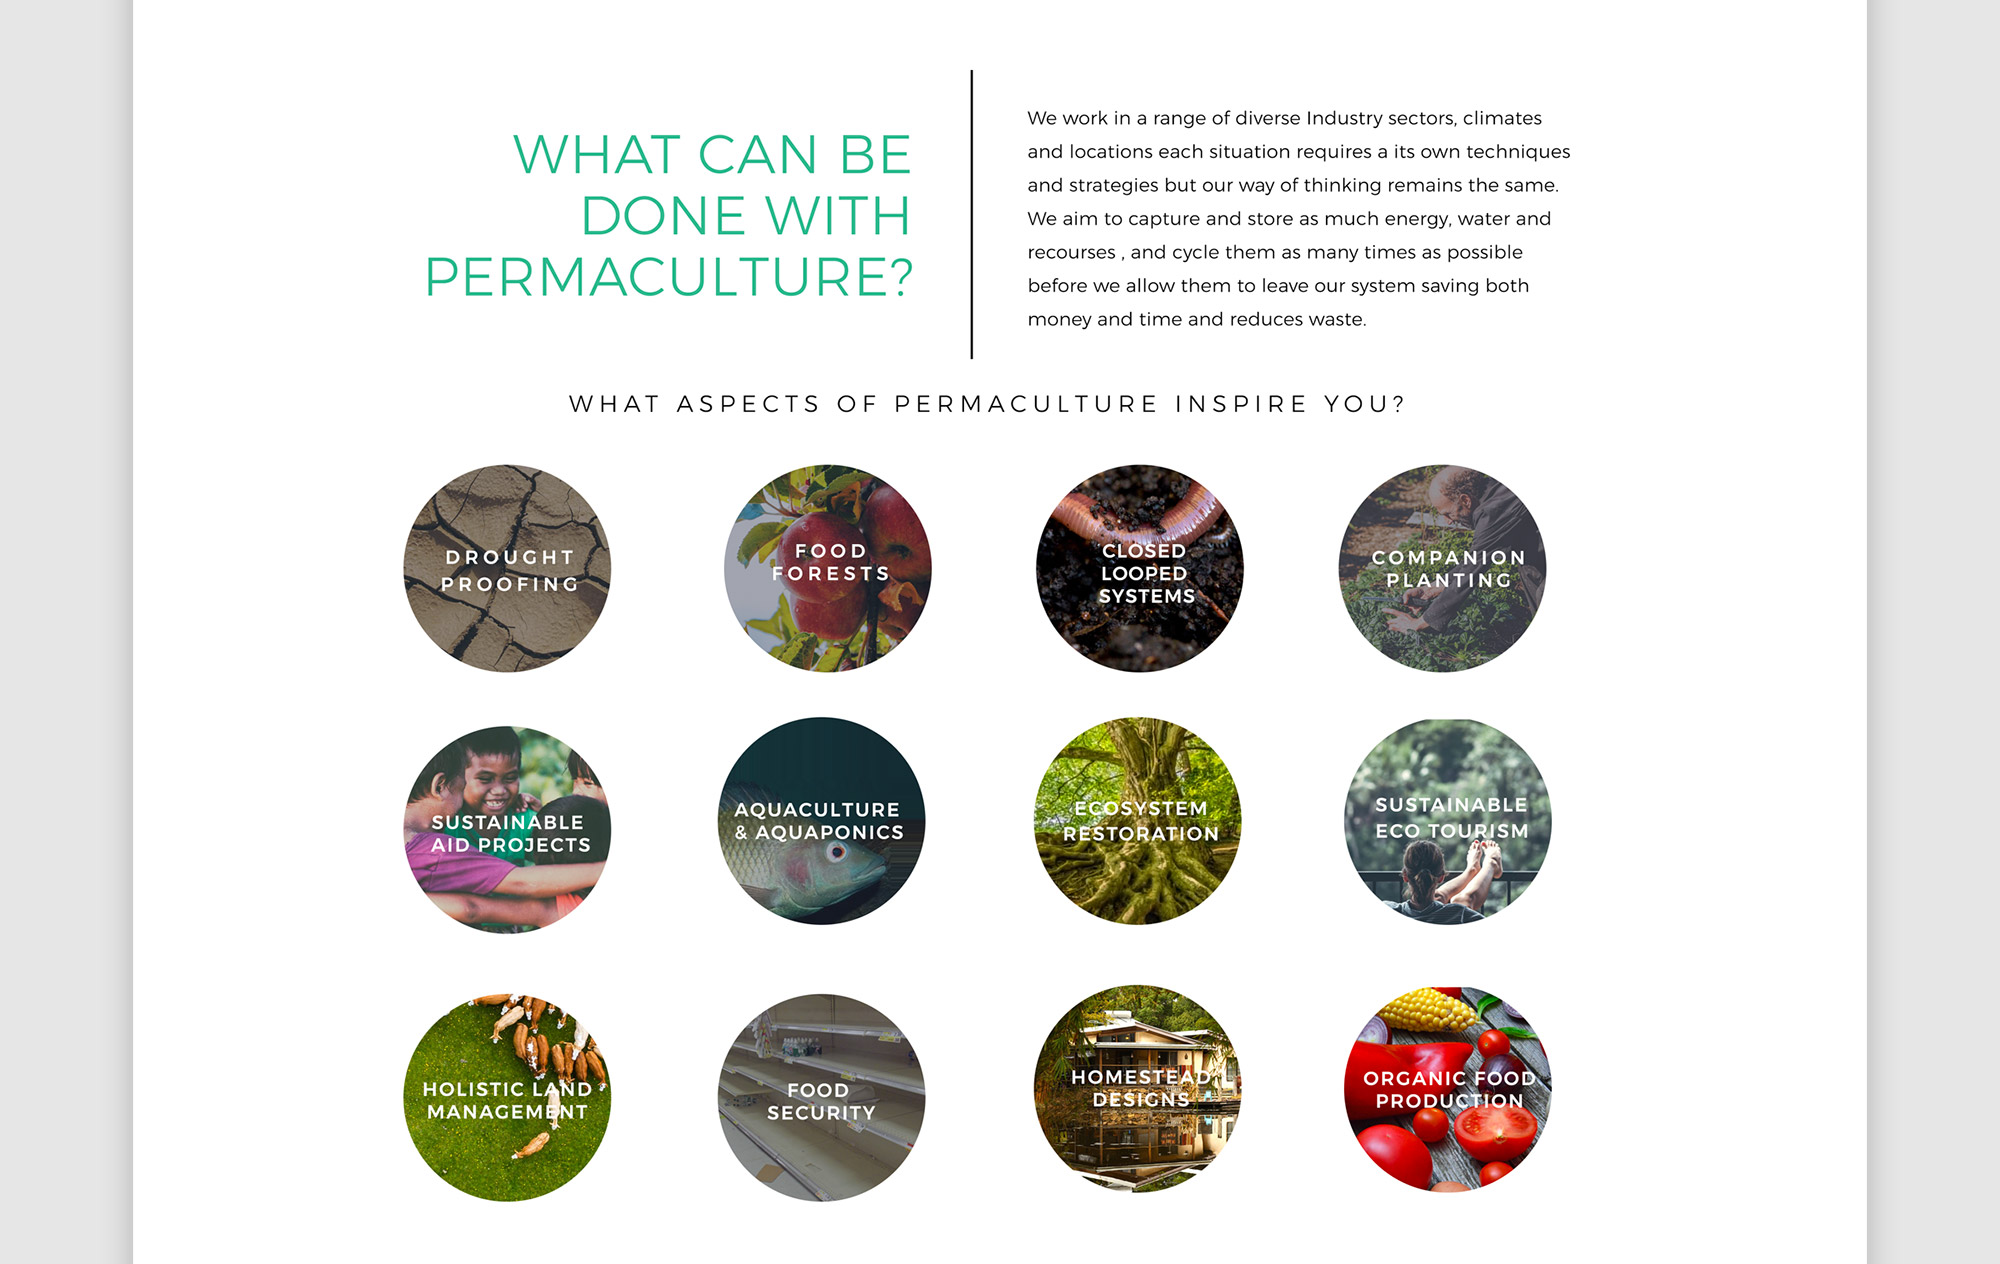 What can be done with permaculture?